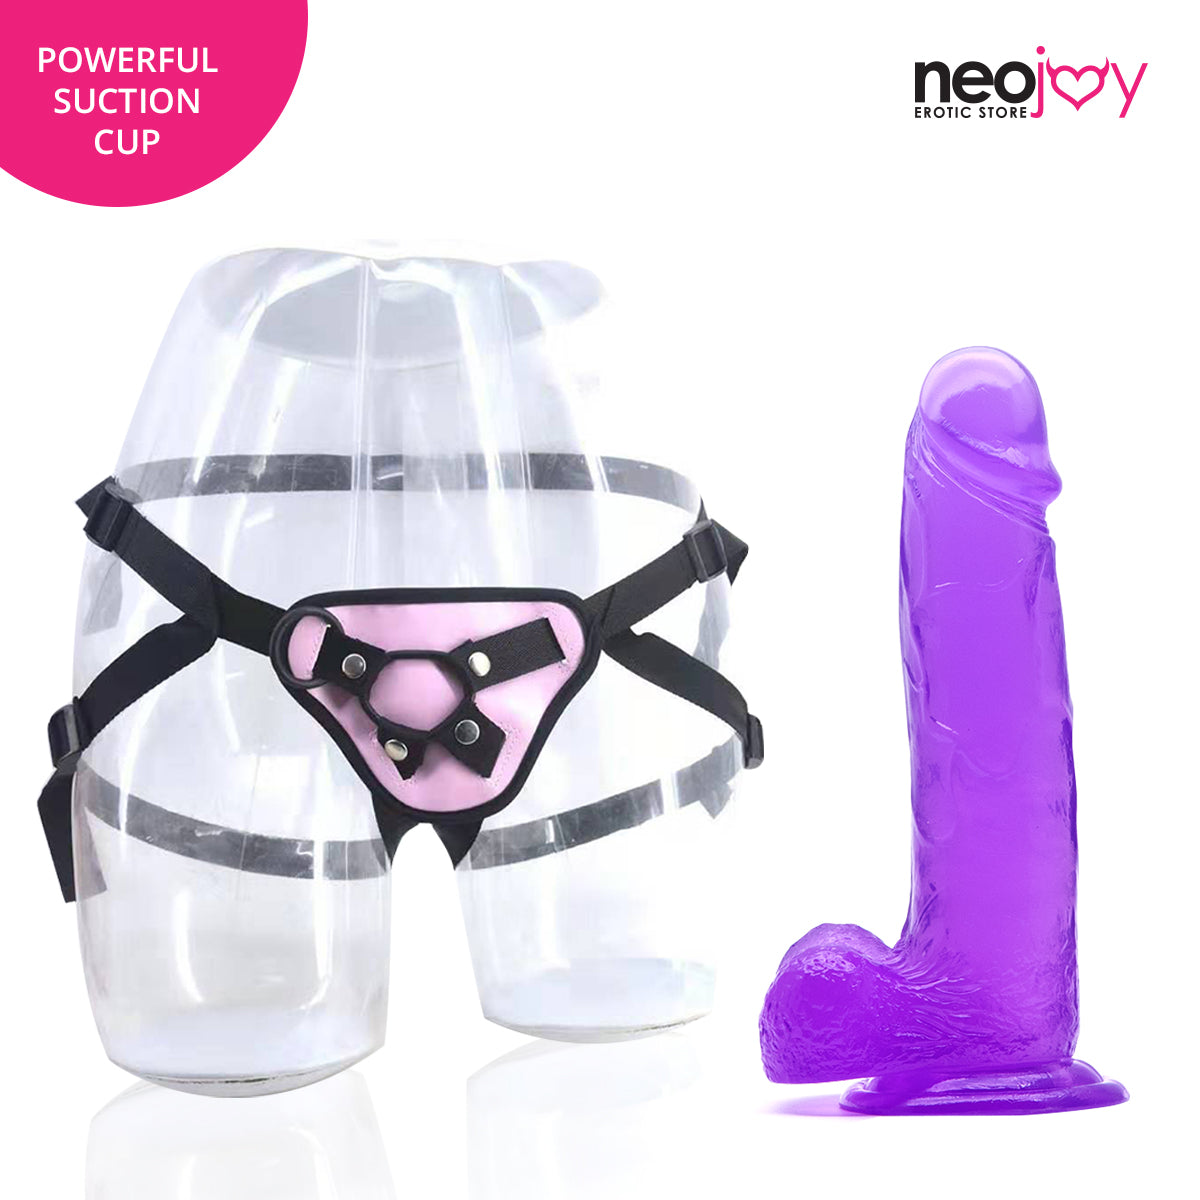 Neojoy - Jelly Dildo With Strap-On Dong - Purple - 20cm - 7.9 inch